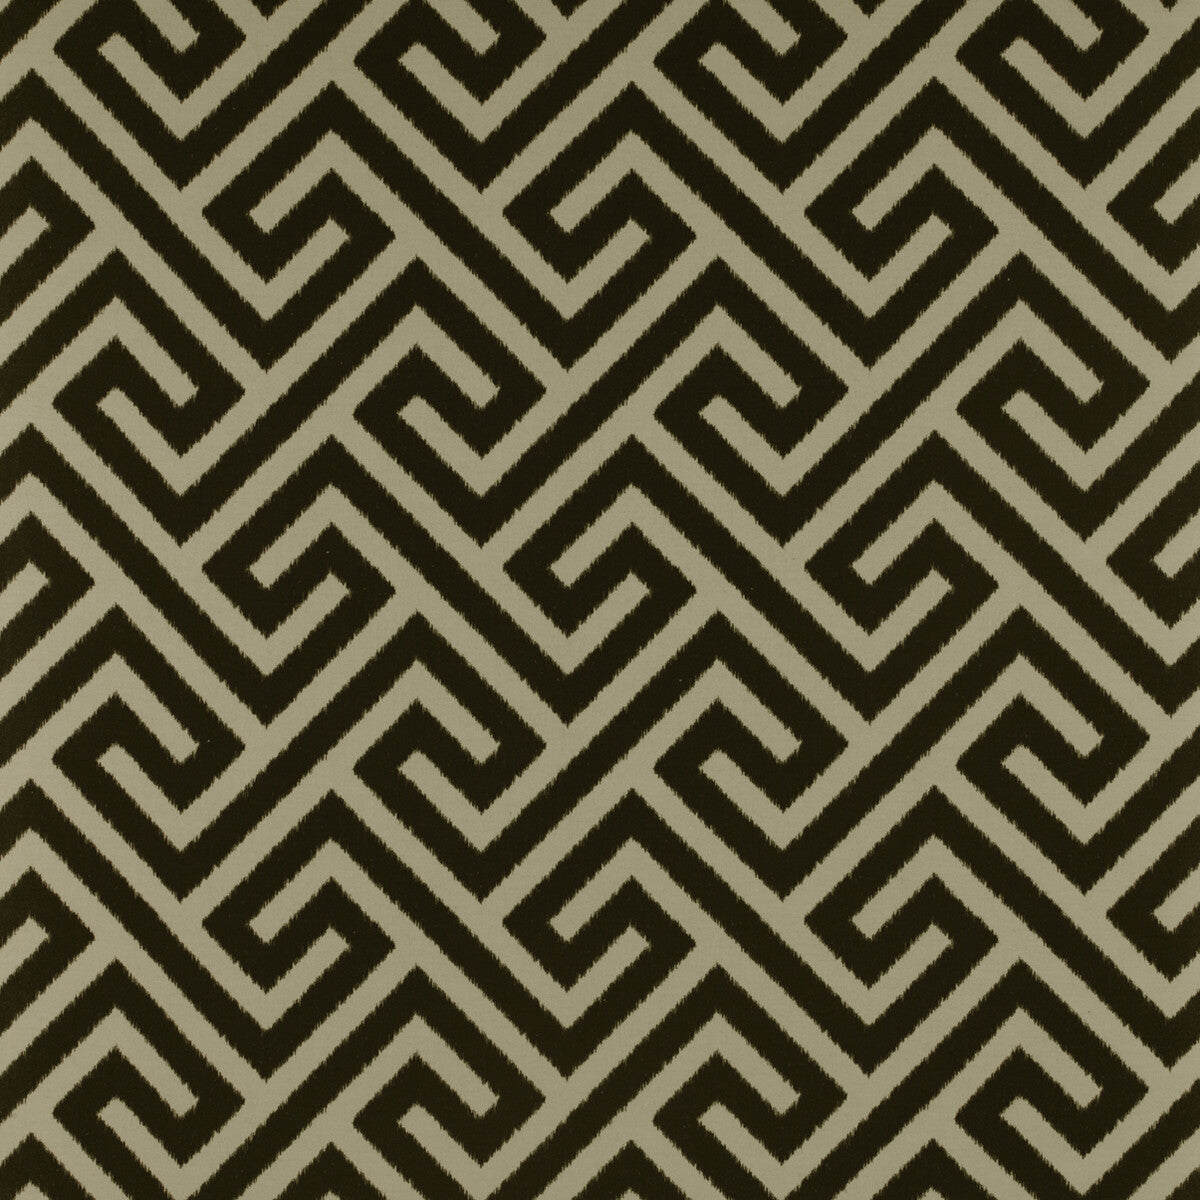 Trevi fabric in onyx color - pattern GDT5337.004.0 - by Gaston y Daniela in the Tierras collection